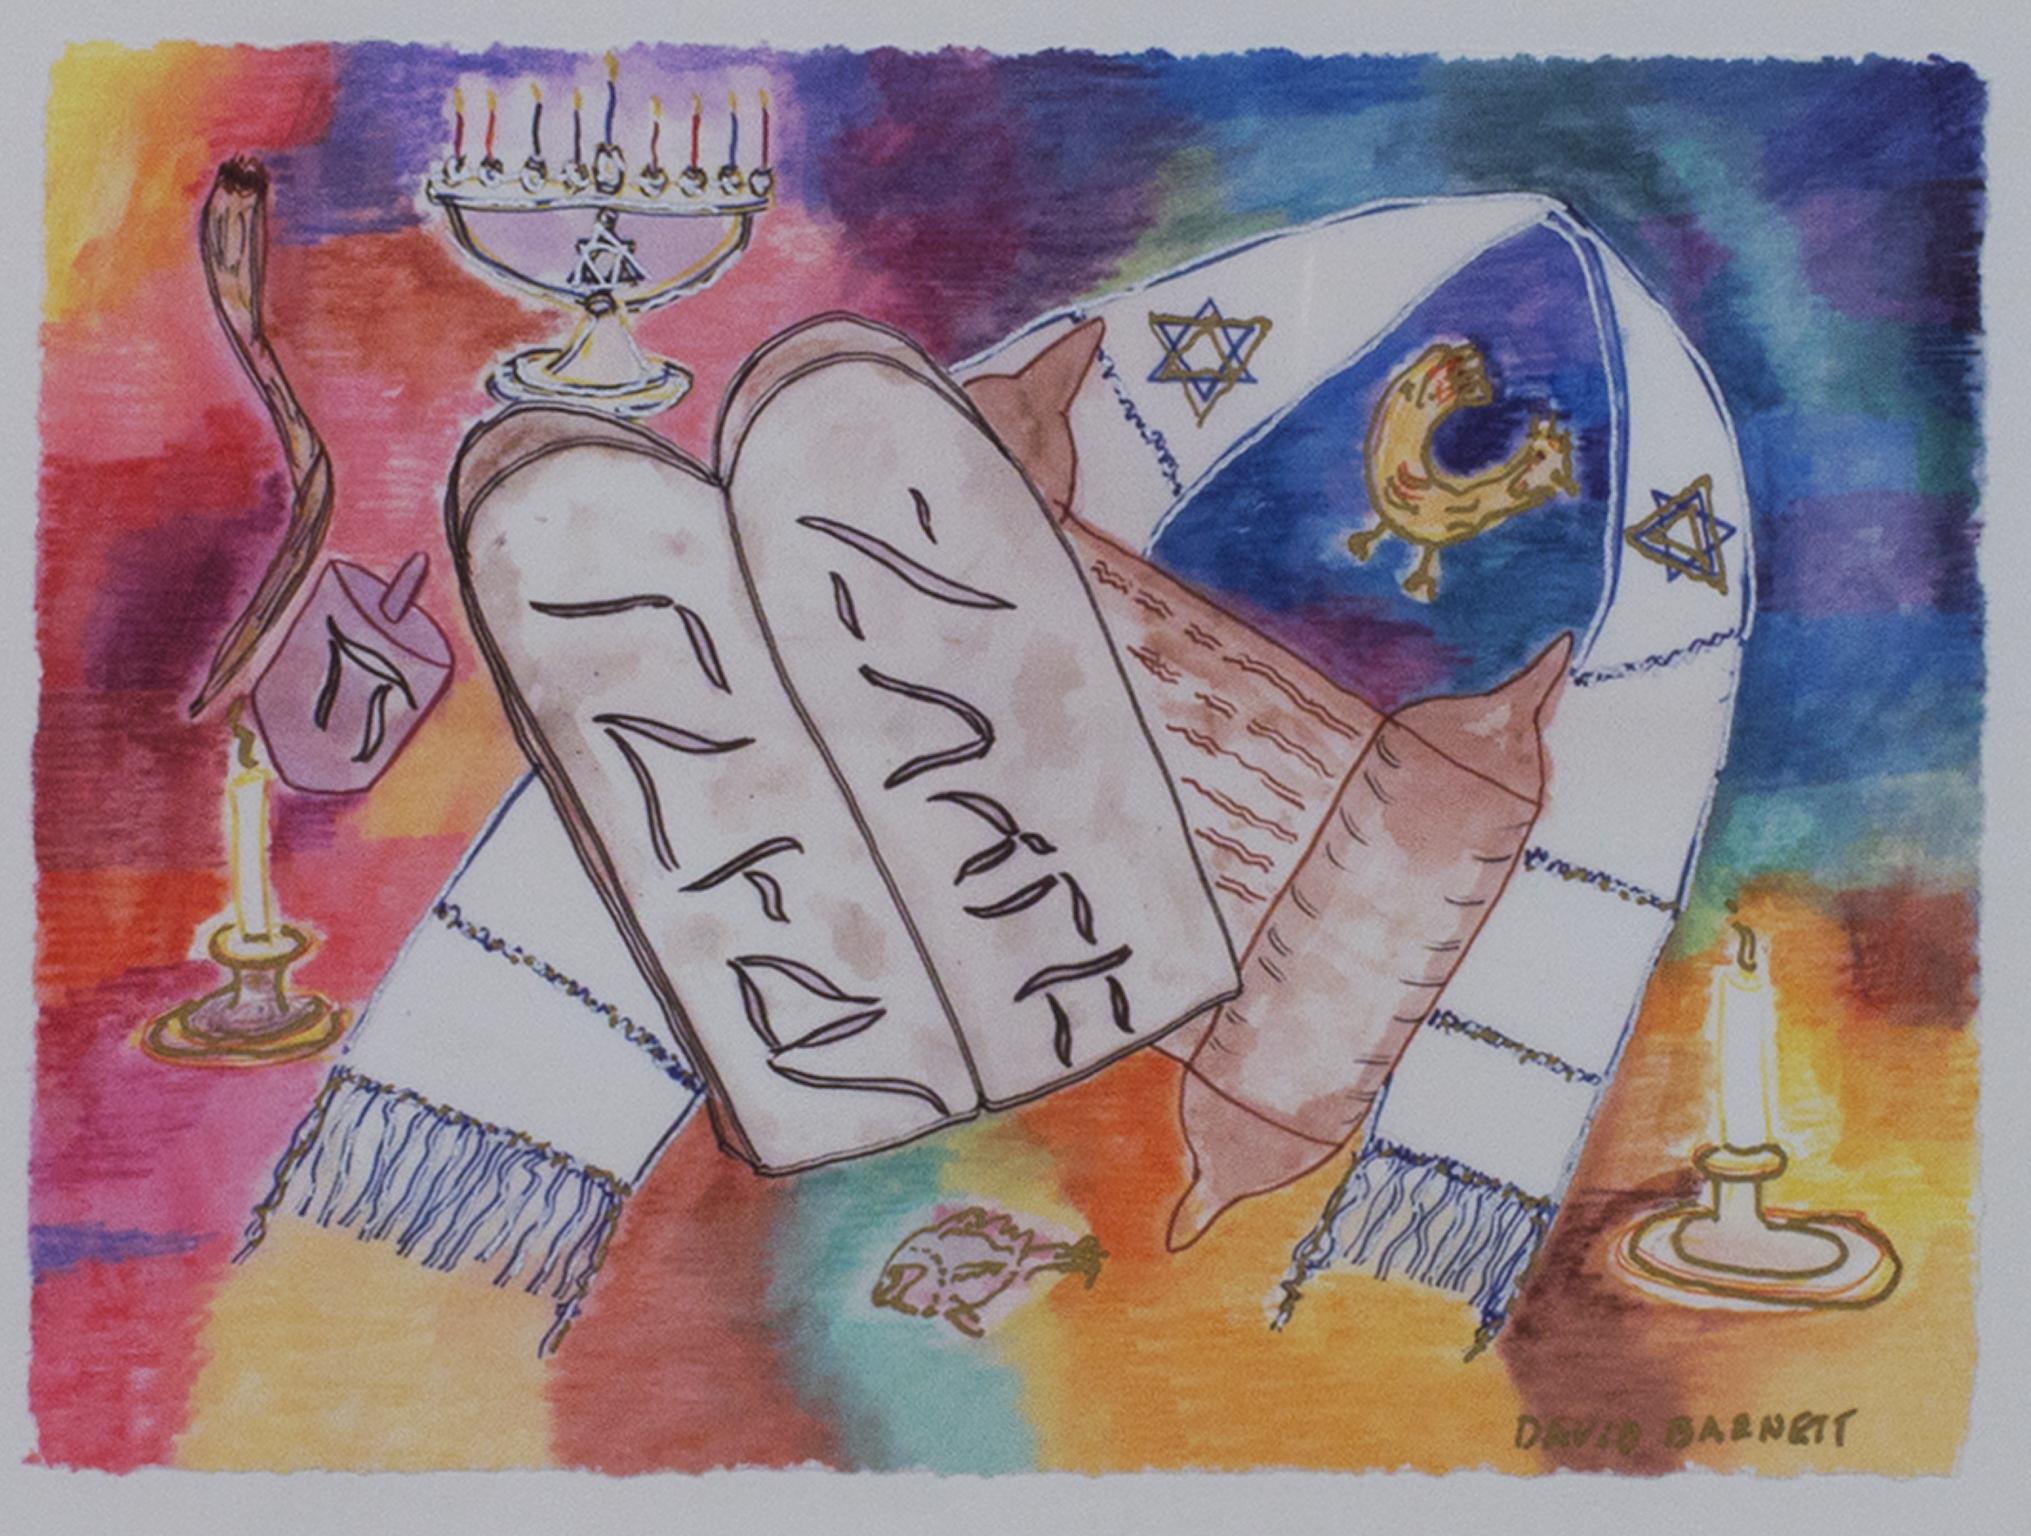 "Ten Commandments" is an original mixed media painting by David Barnett, signed in the lower right. It features imagery associated with the Jewish faith on a brightly colored background of blue, yellow, and pink. 

Art size: 6" x 8"
Frame size: